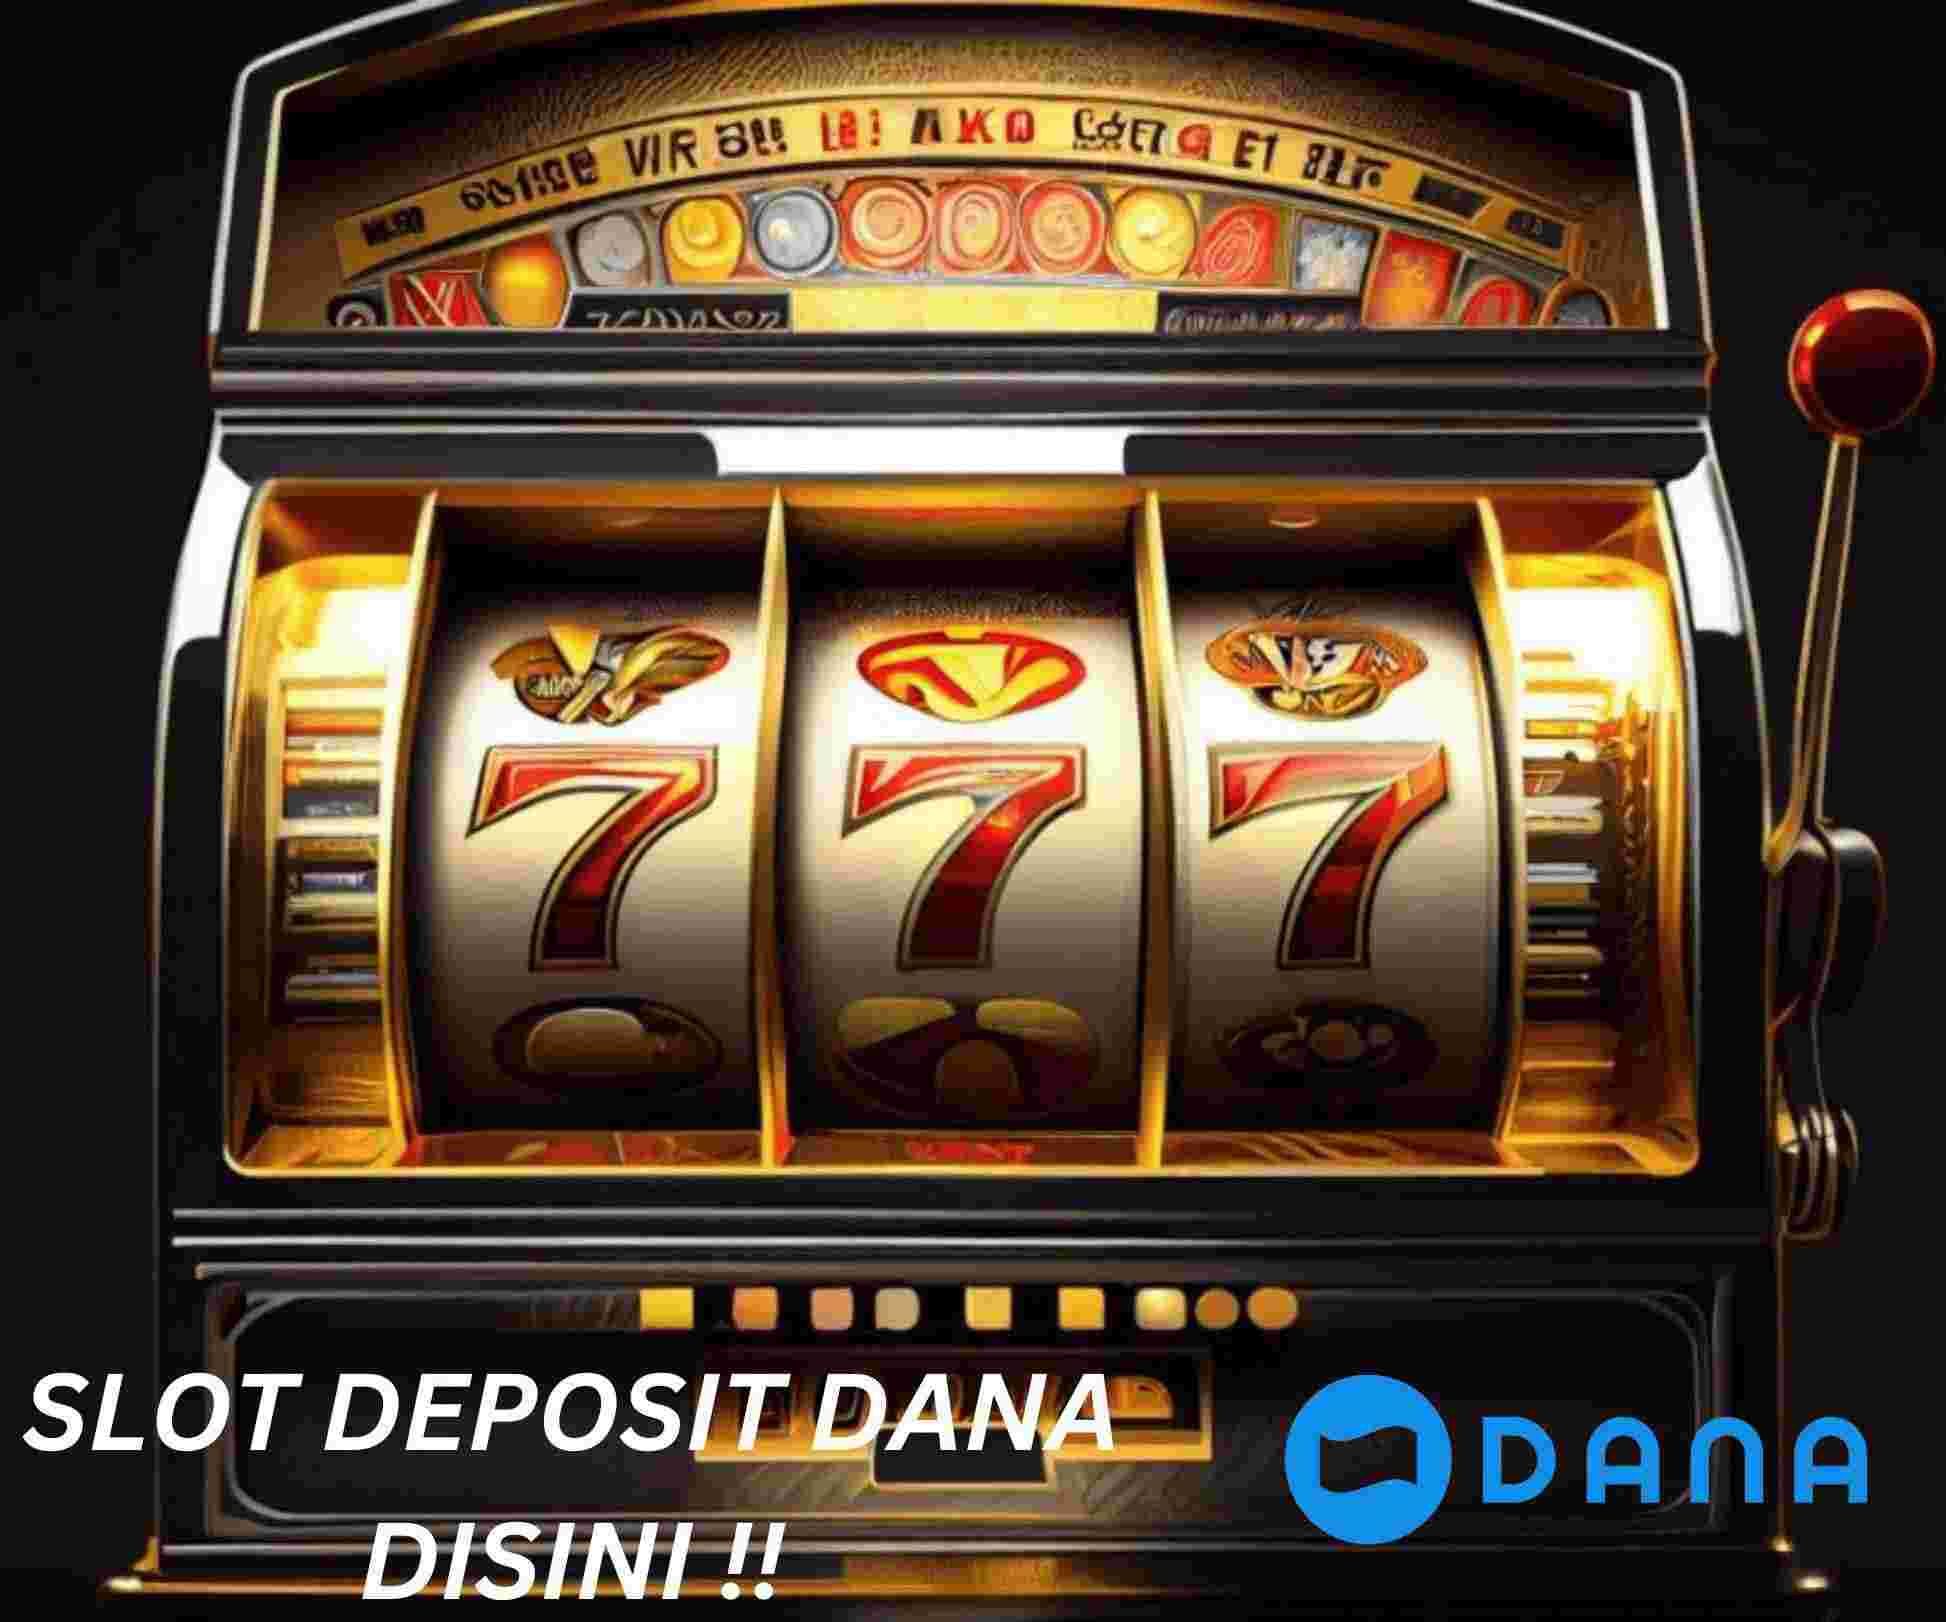 Slot deposit dana are one of the most sought after slots